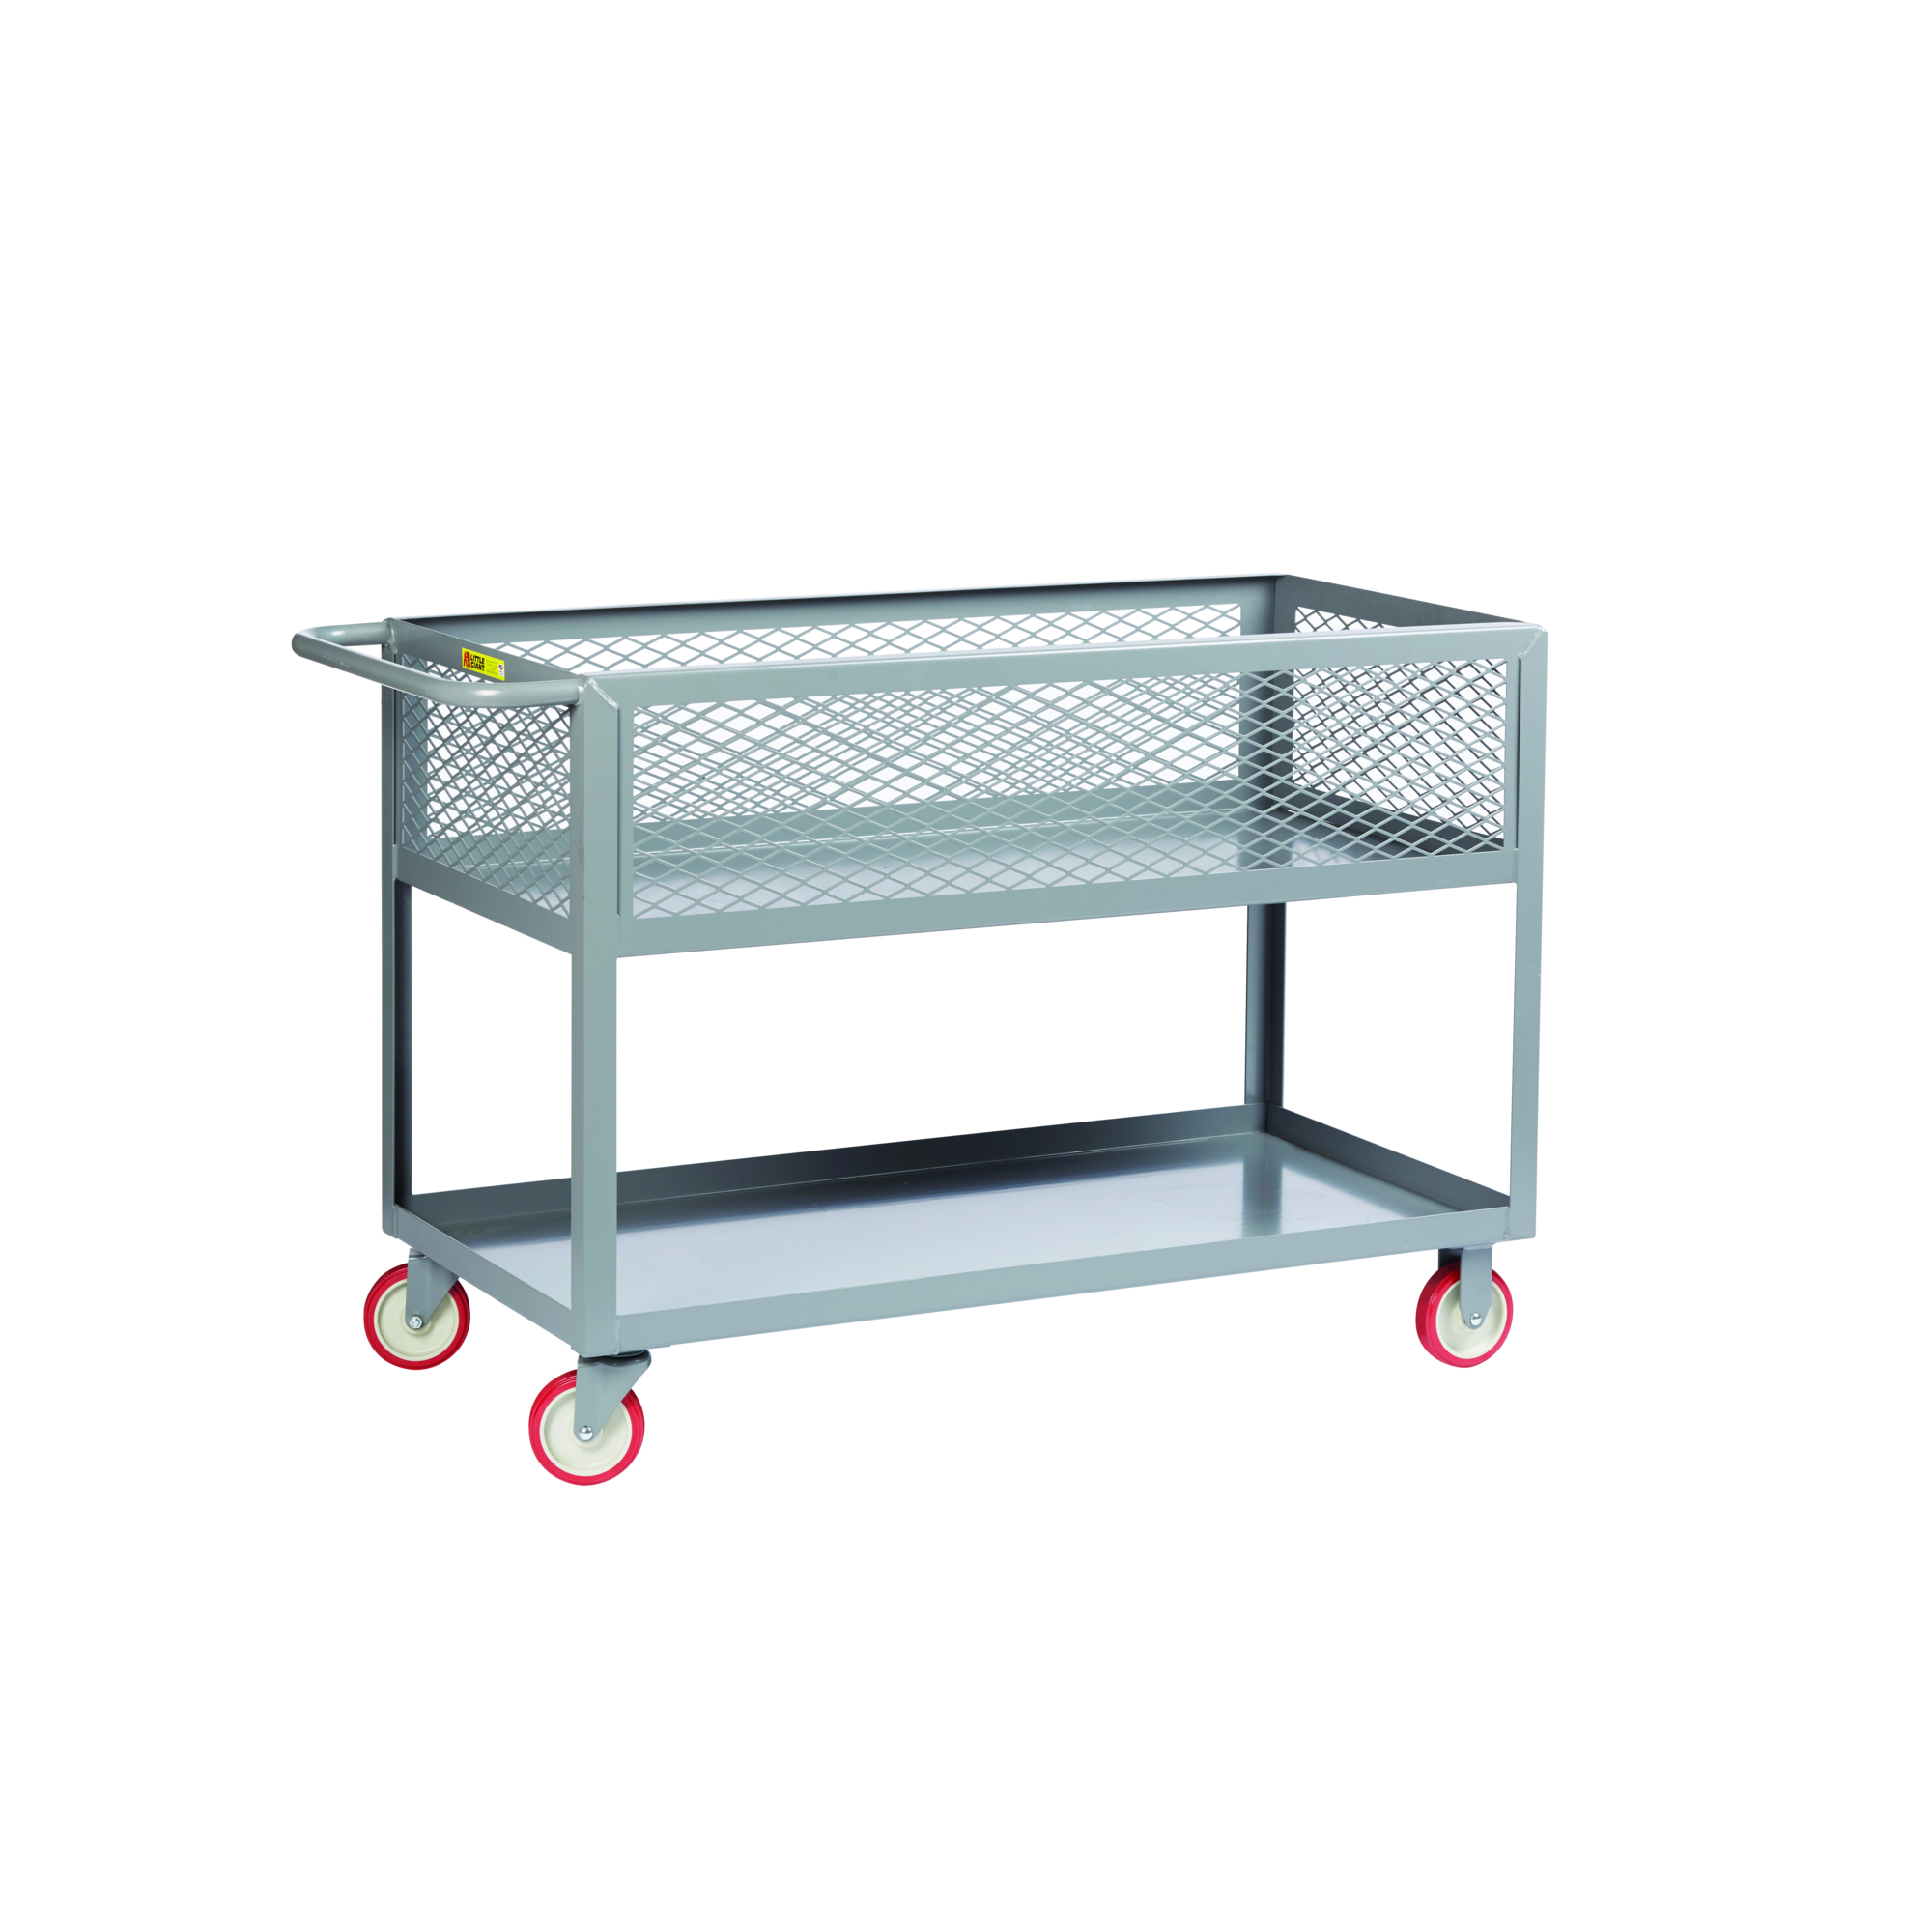 Little Giant, 12Inch Deep Shelf Truck, Mesh Sides, 24x36, 1200 lbs, Total Capacity 1200 lb, Shelves (qty.) 2, Material Carbon Steel, Model DSX-2436-